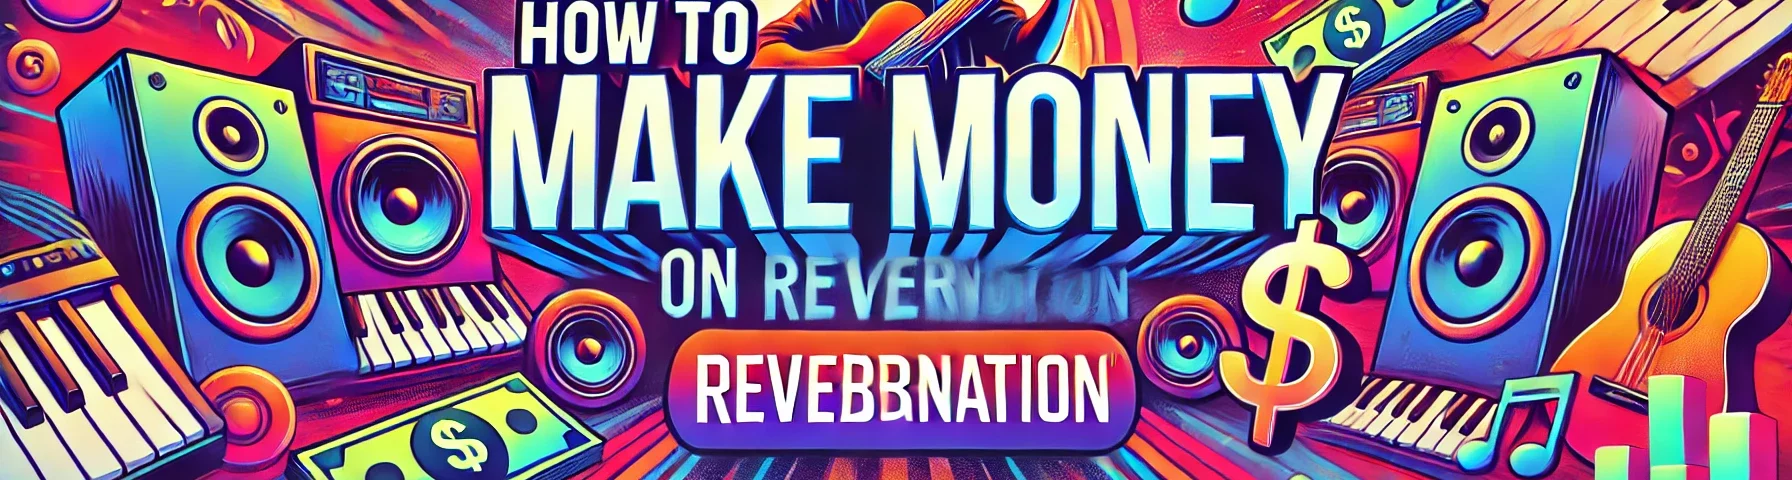 How to Make Money on ReverbNation